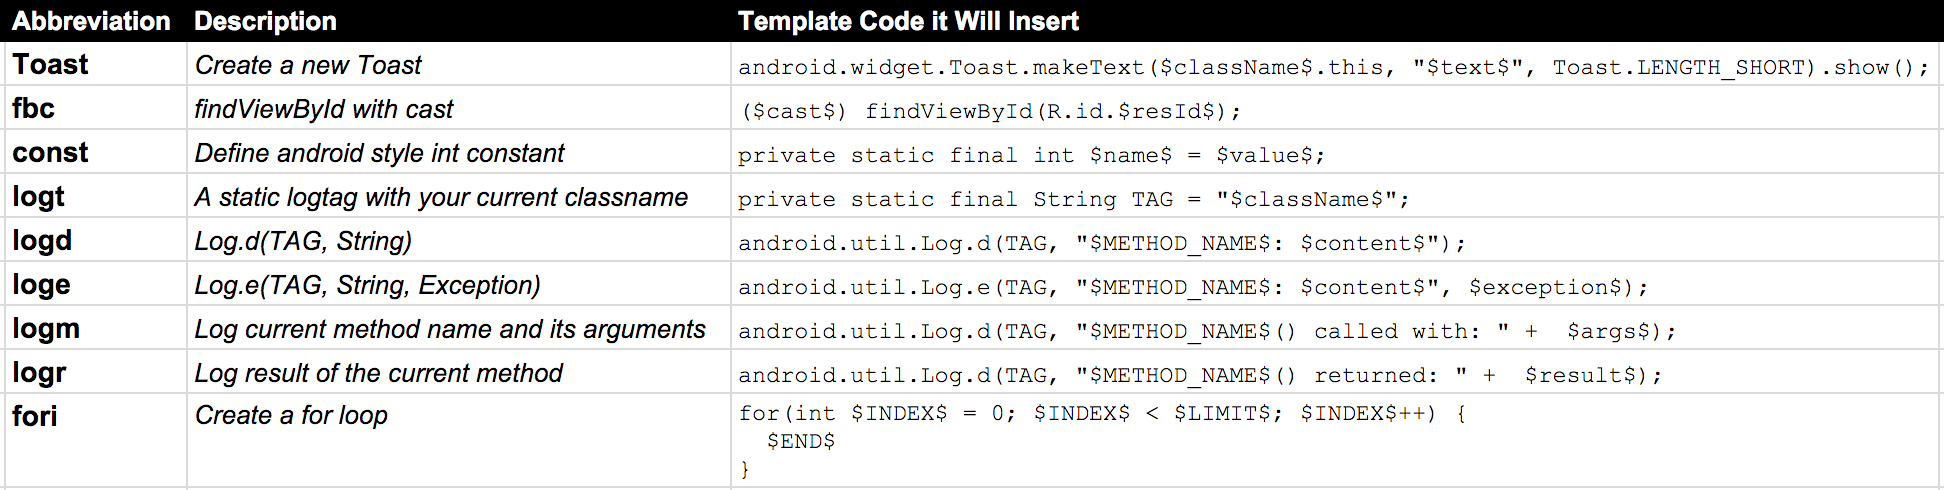 Writing More Code by Writing Less Code with Android Studio Live Templates |  by Reto Meier | Google Developers | Medium